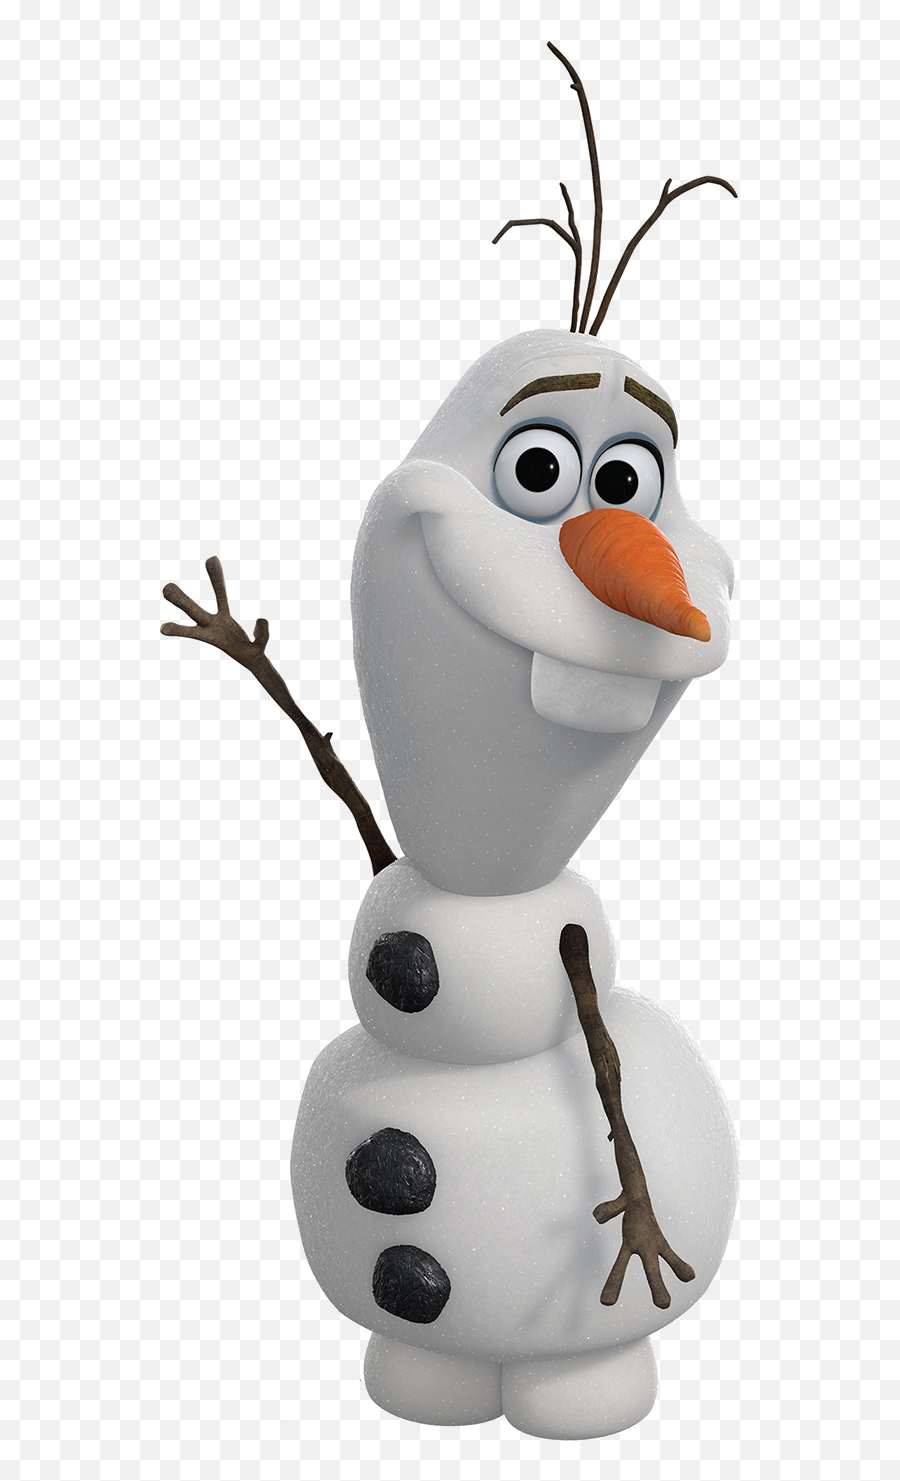 Download Free Png Olaf Snowman Clipart Mart - Olaf Frozen,Snowman Clipart Png